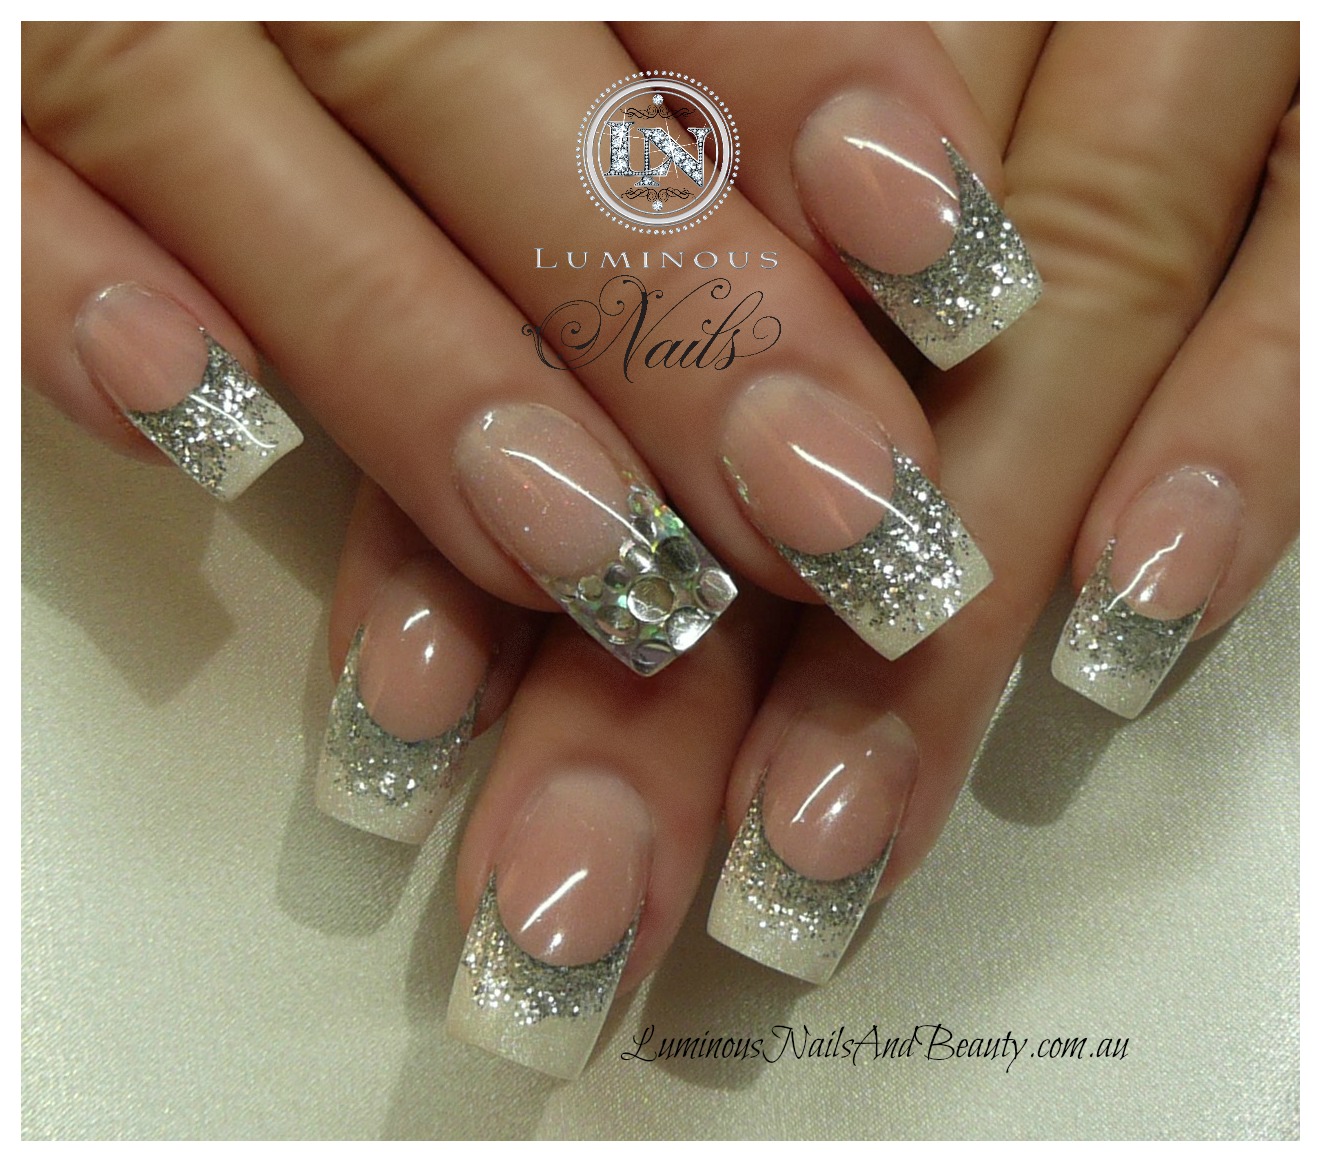 +Nails+and+Beauty,+Gold+Coast+Queensland.+acrylic+nails,+Gel+nails 